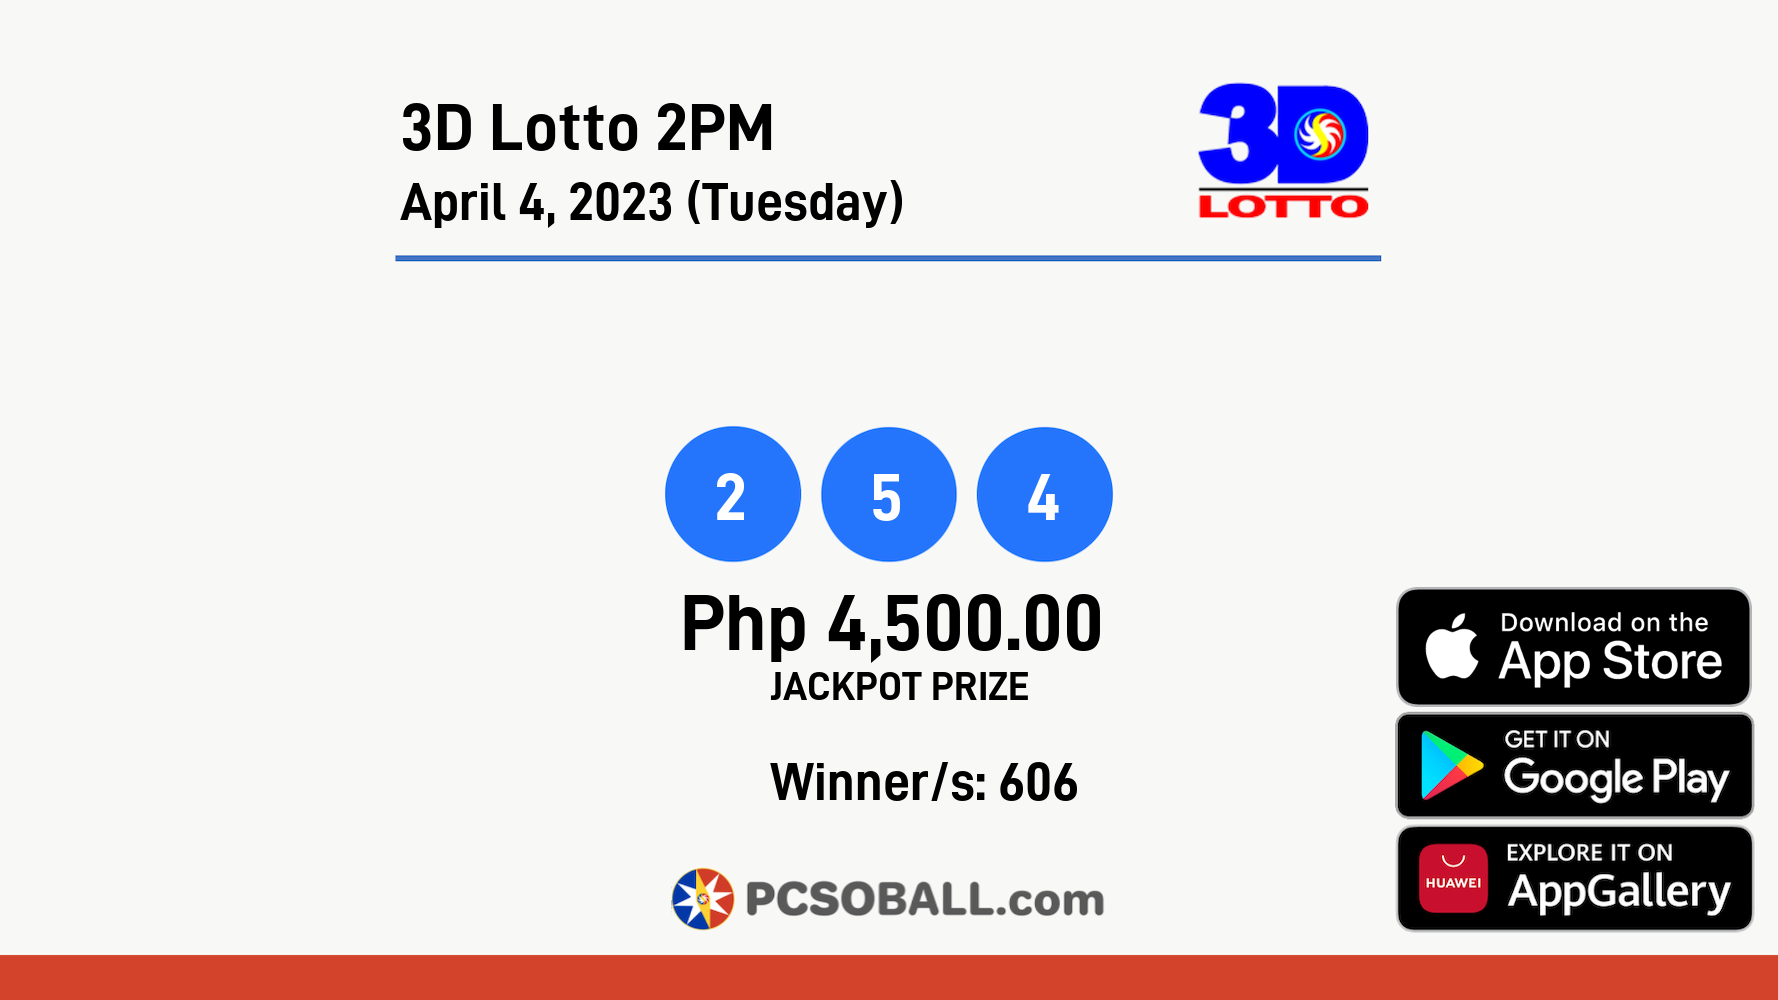 3D Lotto 2PM April 4, 2023 (Tuesday) Result